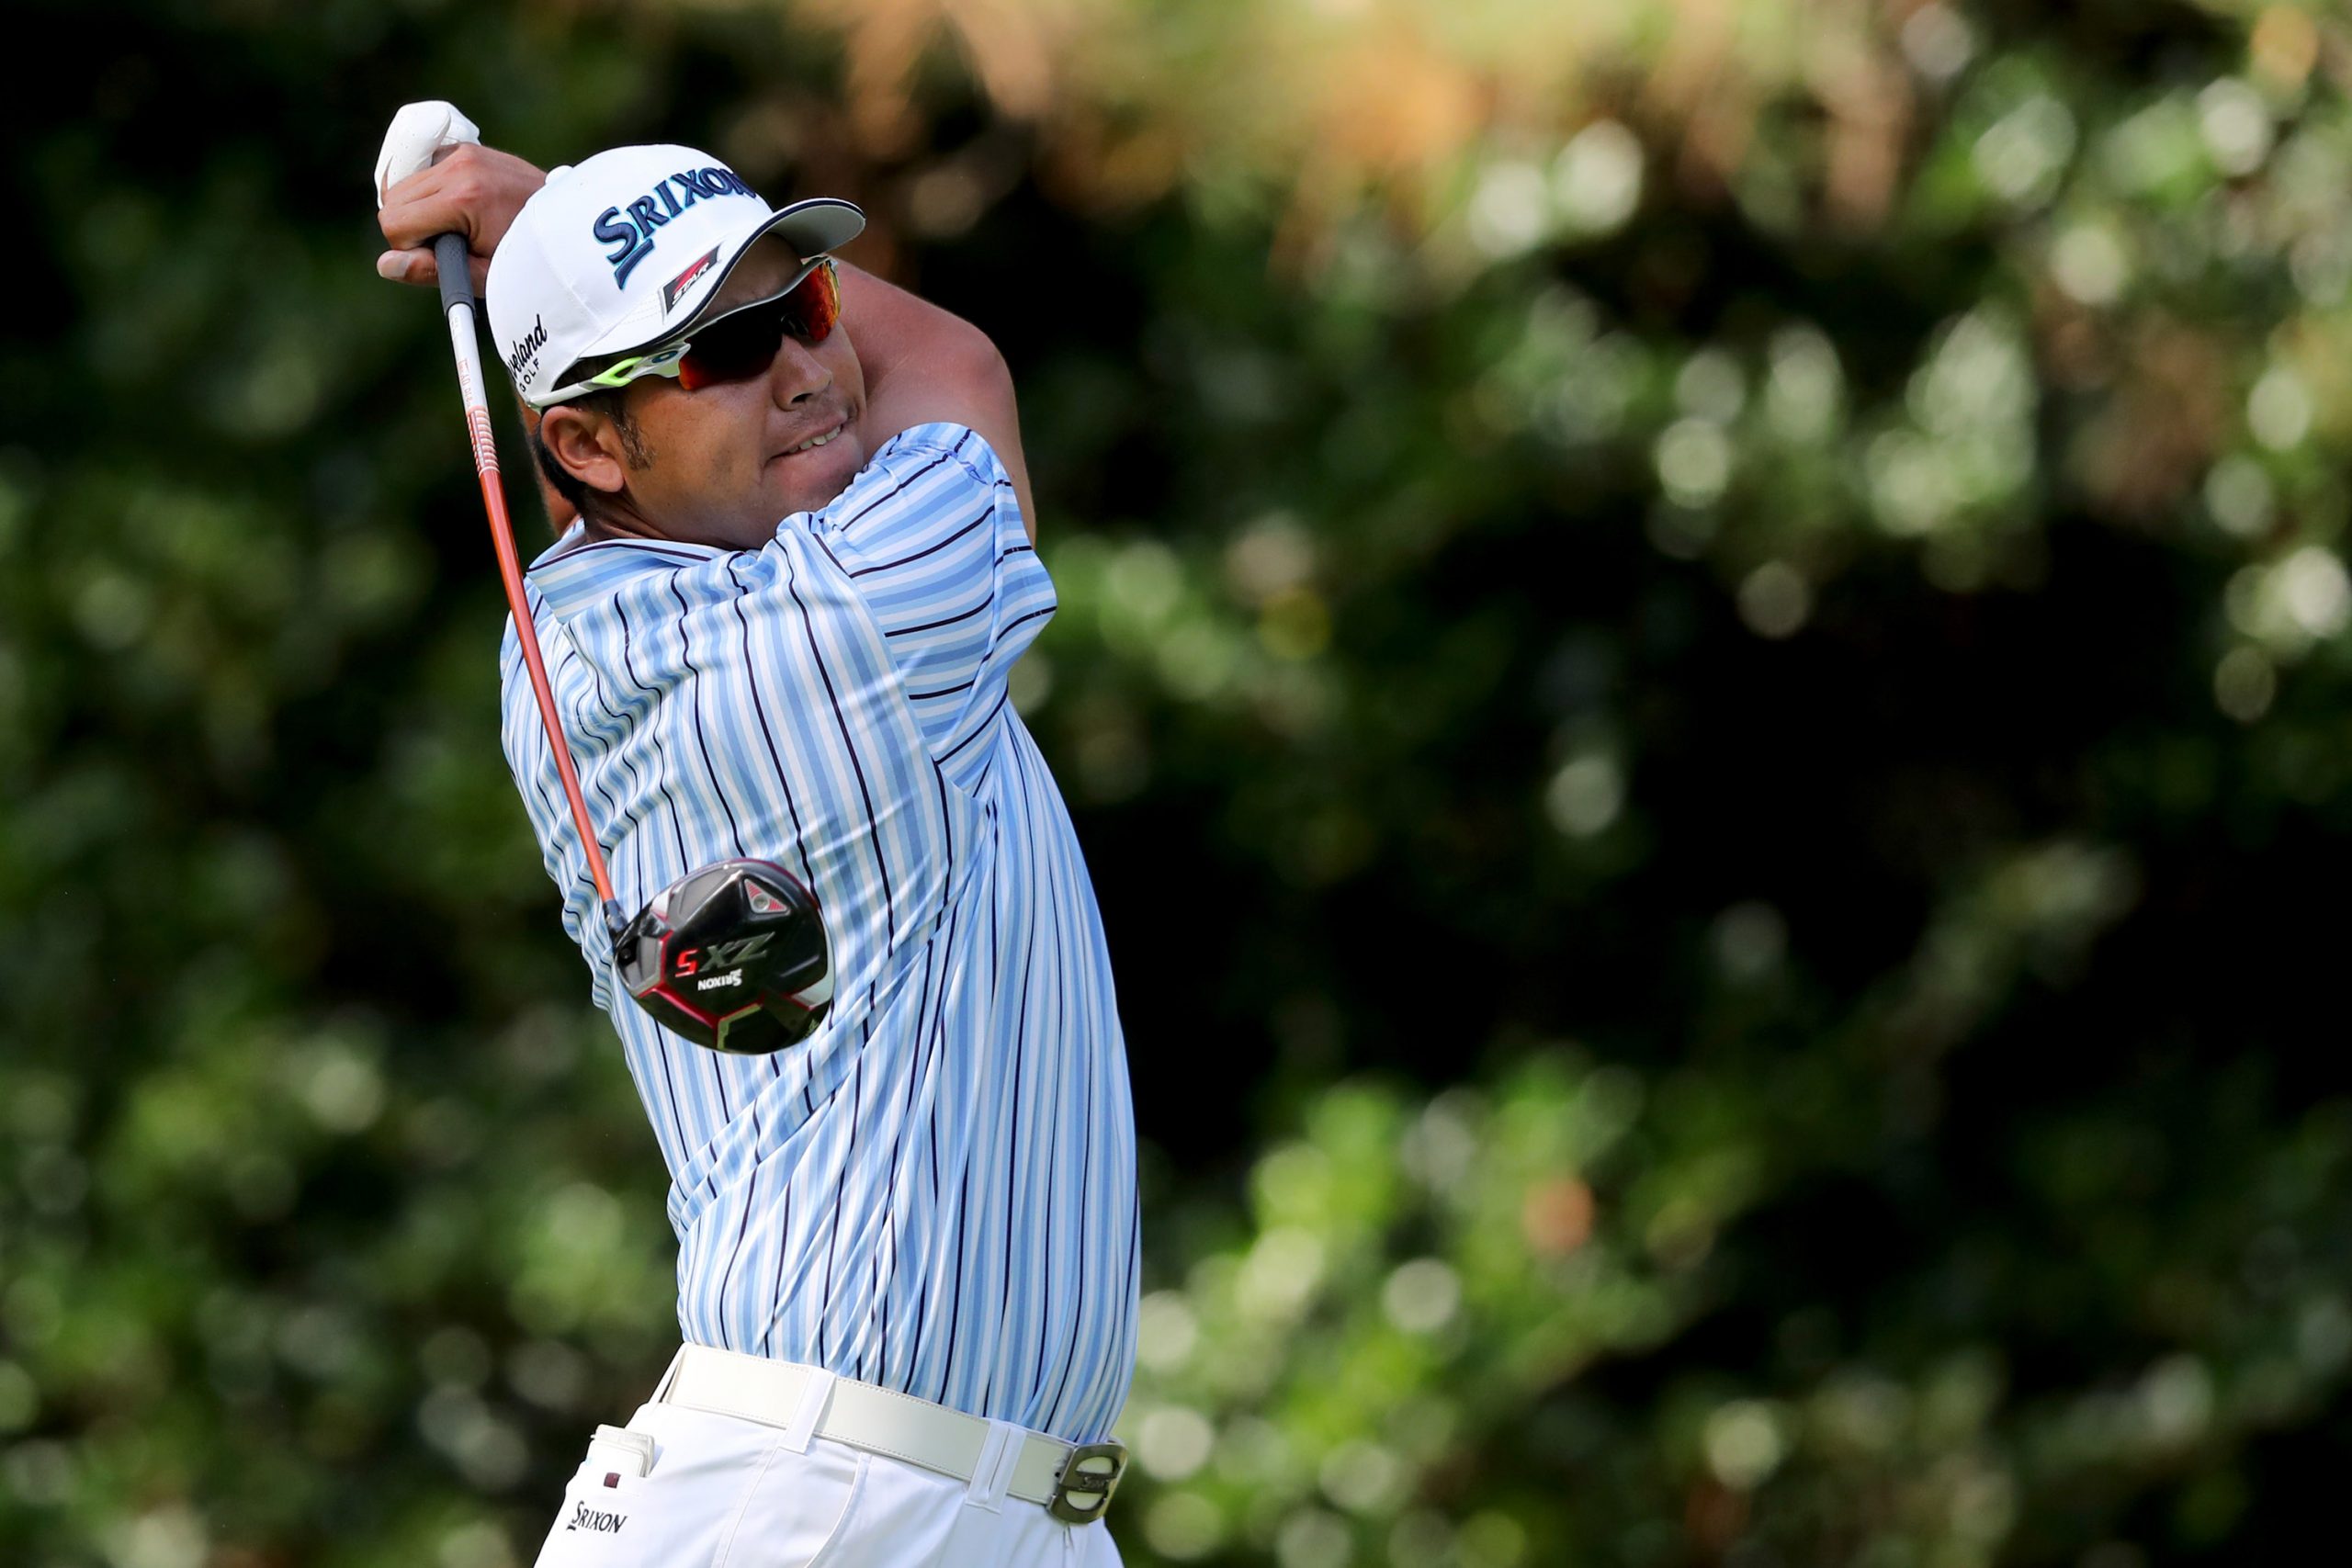 Hideki Matsuyama hits from the 7th tee during the third round of the Masters at Augusta National Golf Club on Saturday, Nov. 14, 2020, in Augusta, Georgia. (Curtis Compton/Atlanta Journal-Constitution/TNS)